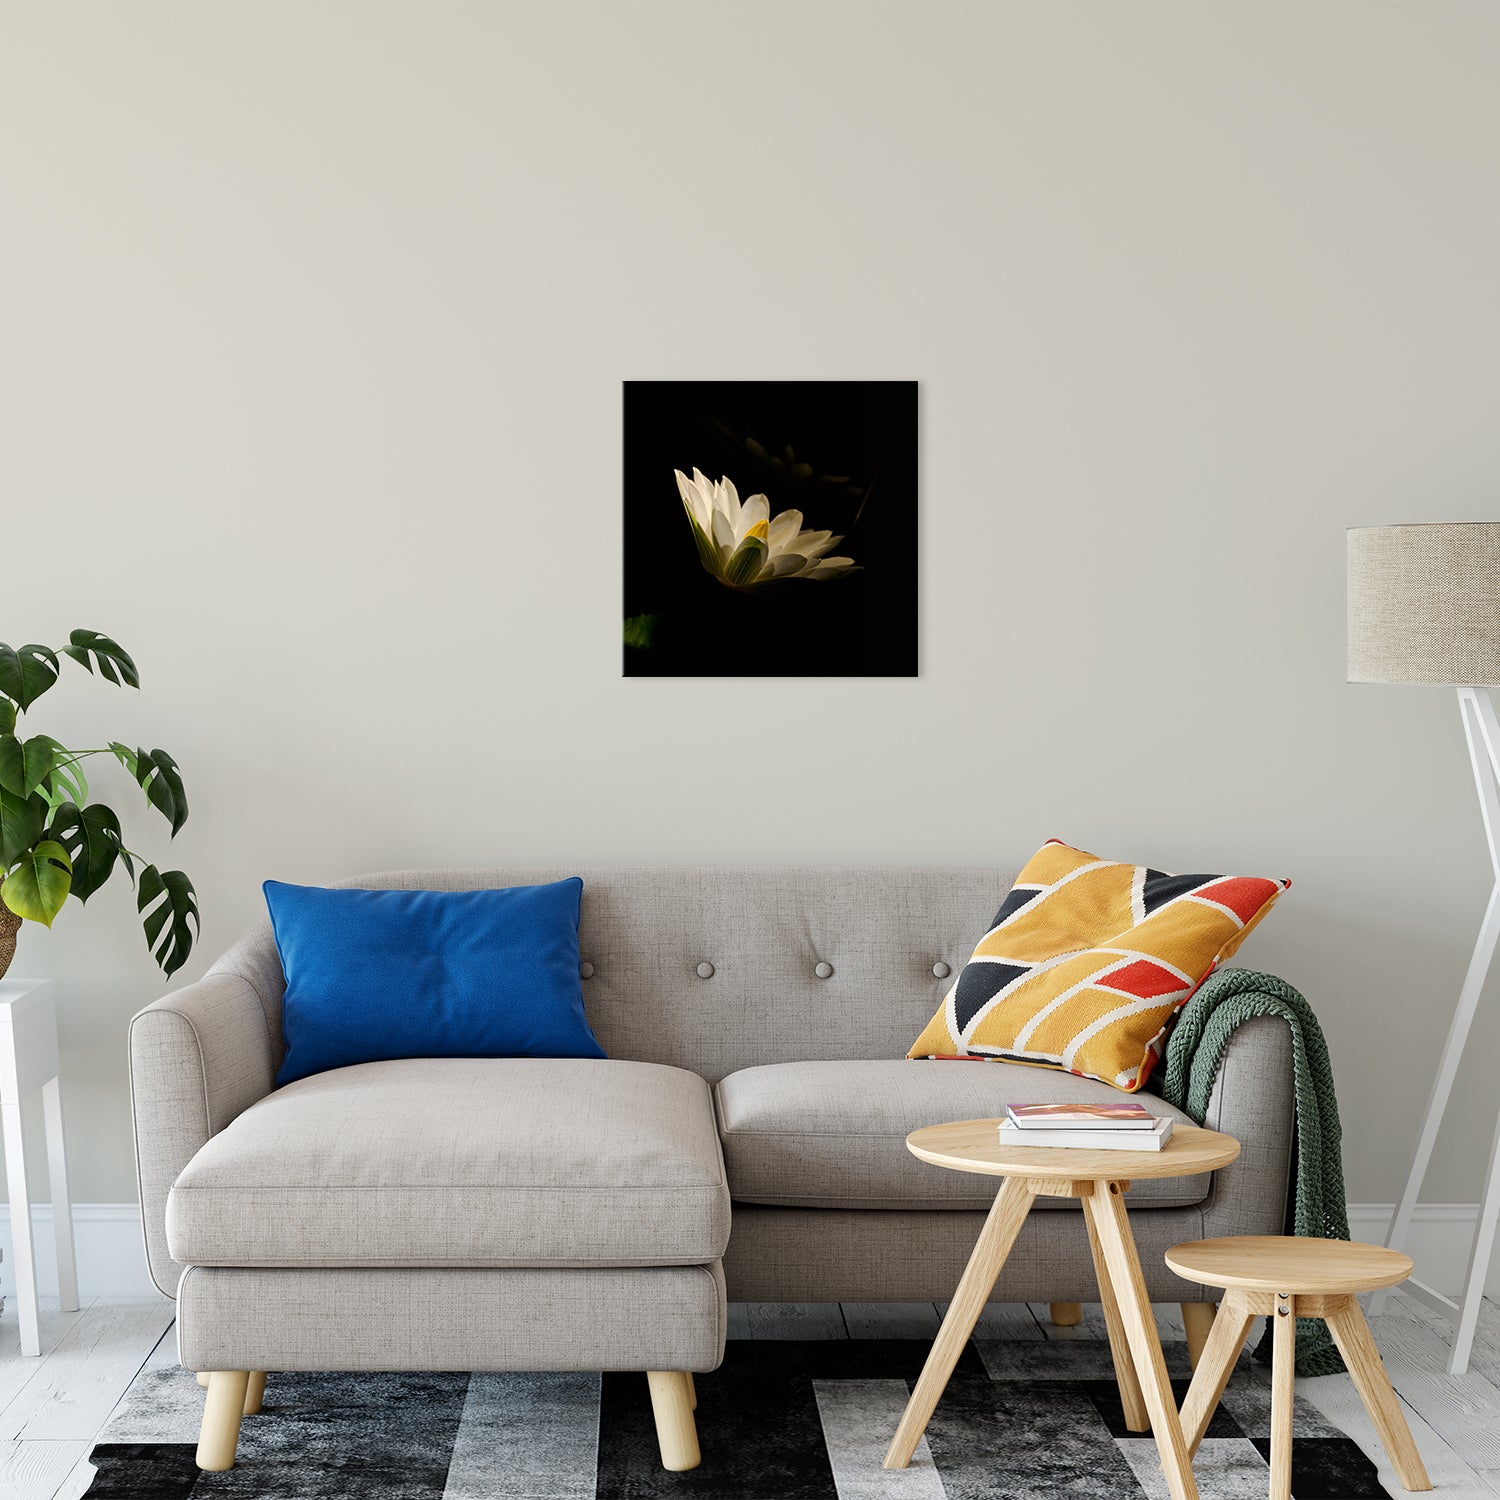 Spotlight on Waterlily - Square Nature / Floral Photo Fine Art & Unframed Wall Art Prints 16" x 16" / Fine Art Canvas - PIPAFINEART